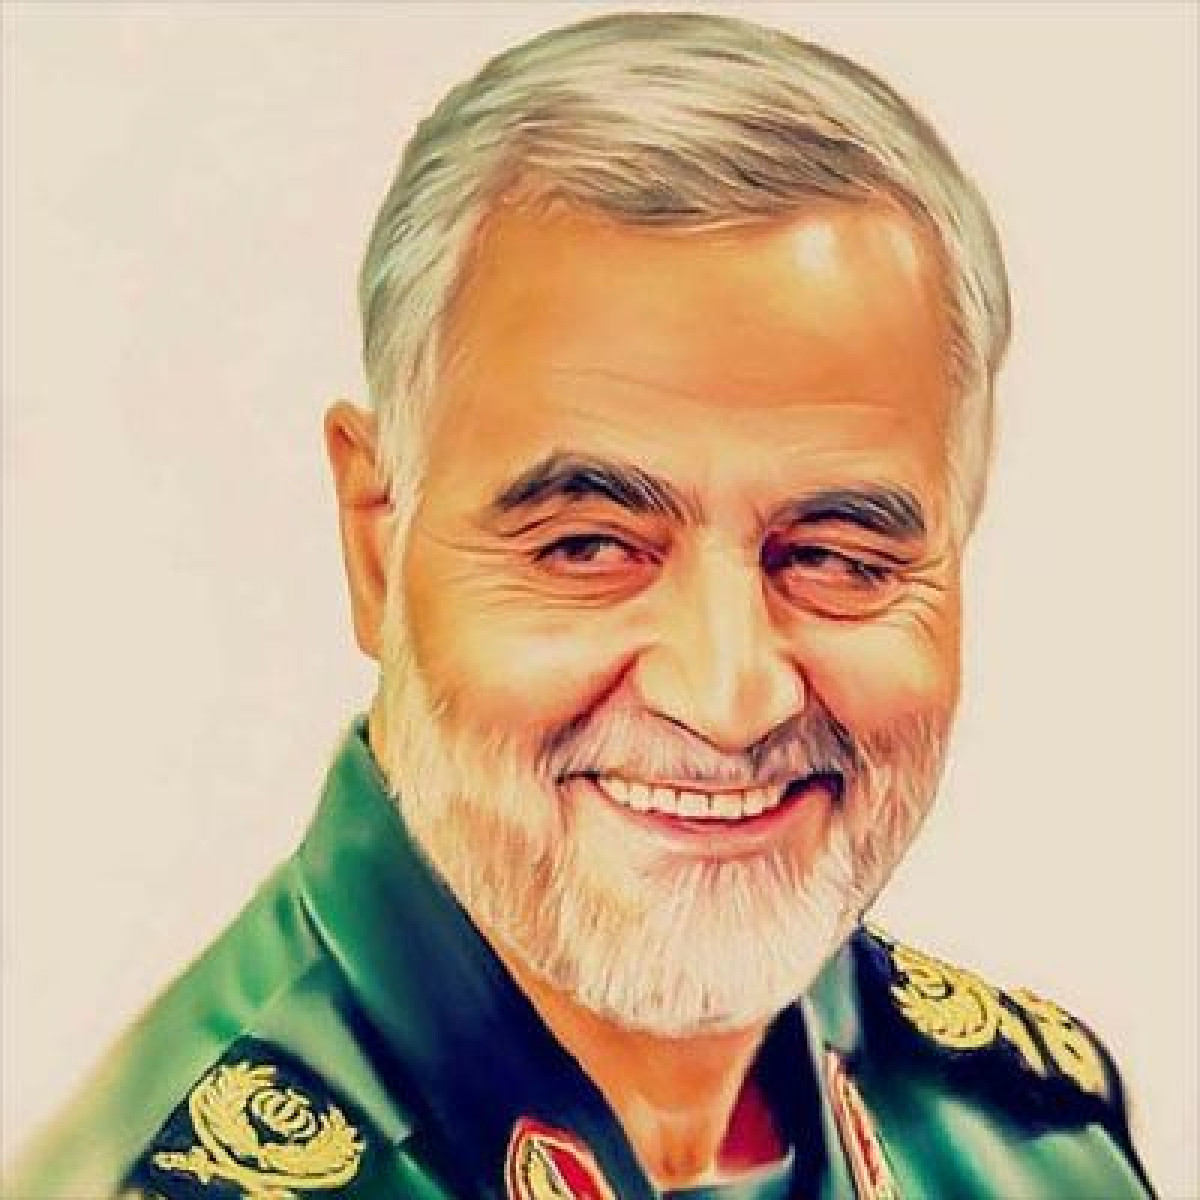 Enemy's goal from Soleimani’s assassination was to sow division in Islamic nation